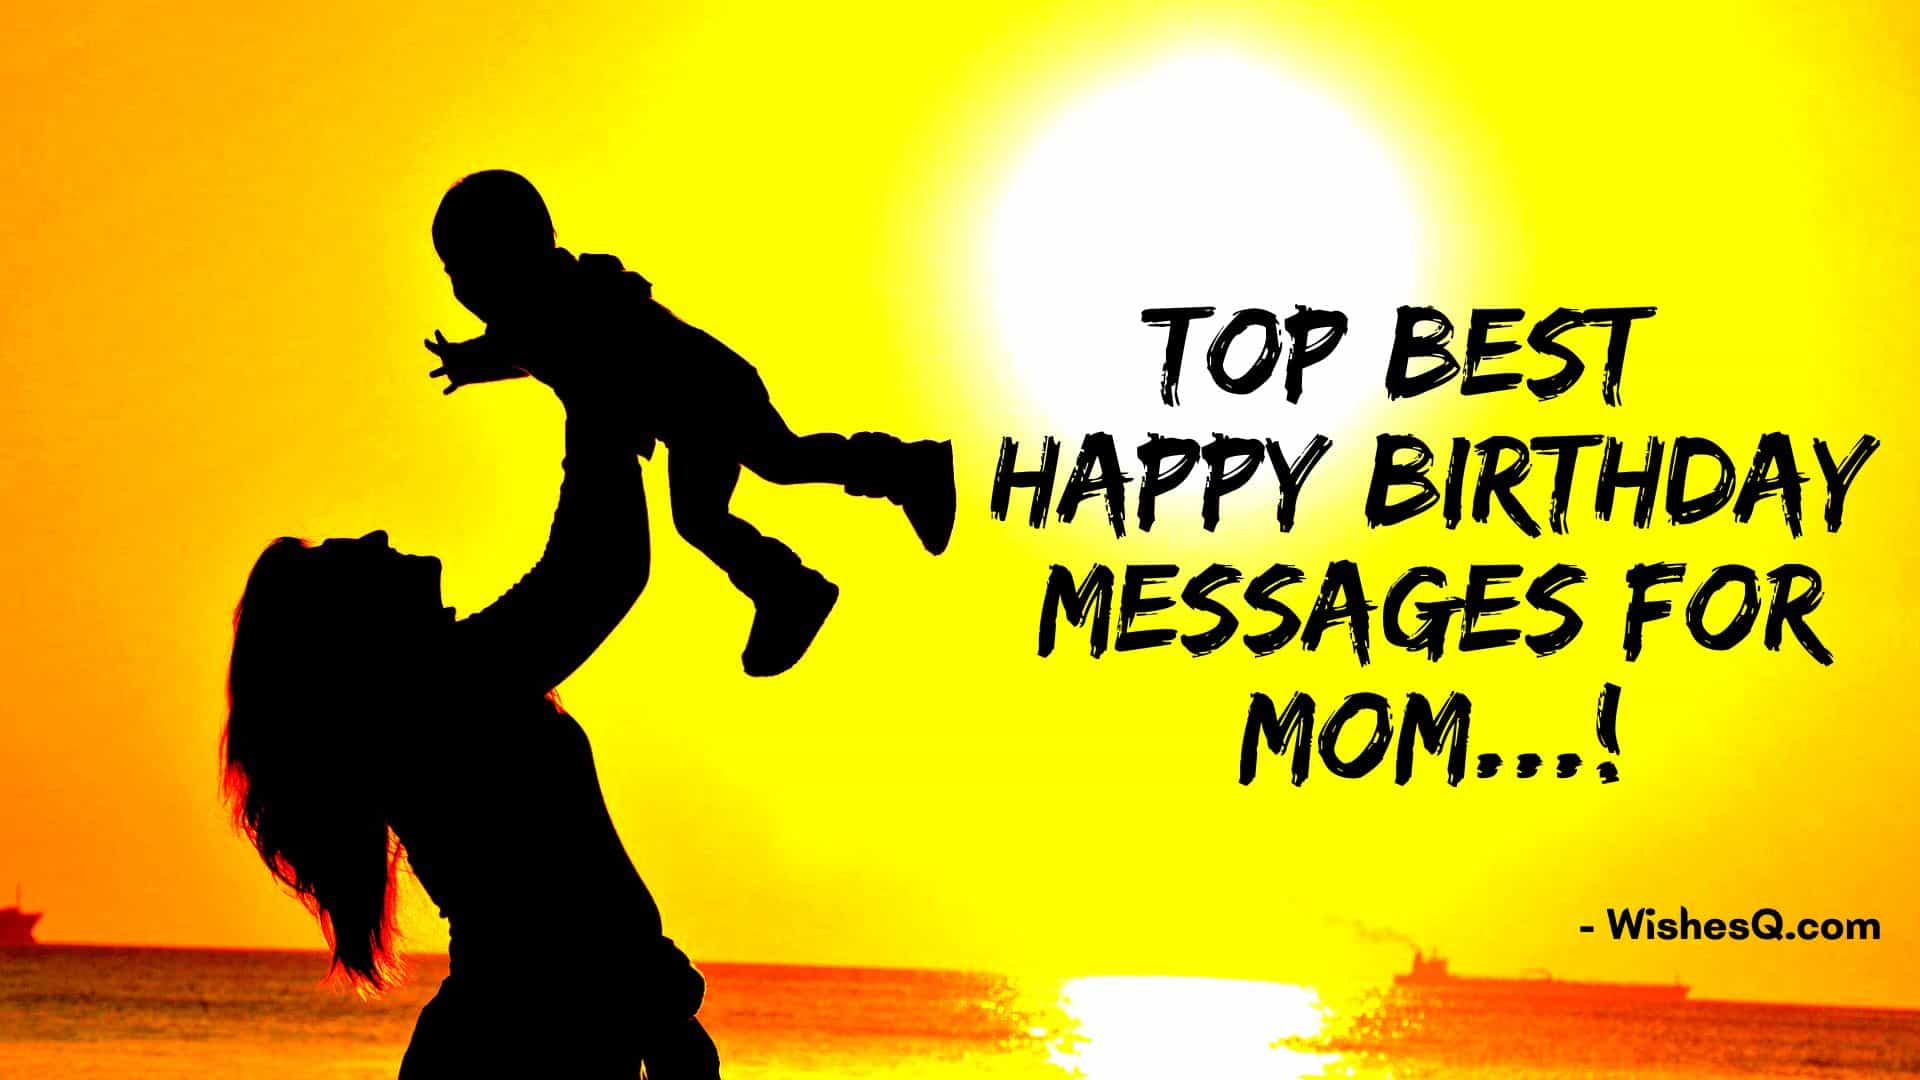 Best Happy Birthday Messages For Mom, Happy Birthday Mom Wishes, Birthday Status For Mom, Happy Birthday Wishes For Mother, Short Birthday Messages For Mom, Happy Birthday Message To Mom, Birthday Status For Mom From Daughter, and Status For Mom Birthday.